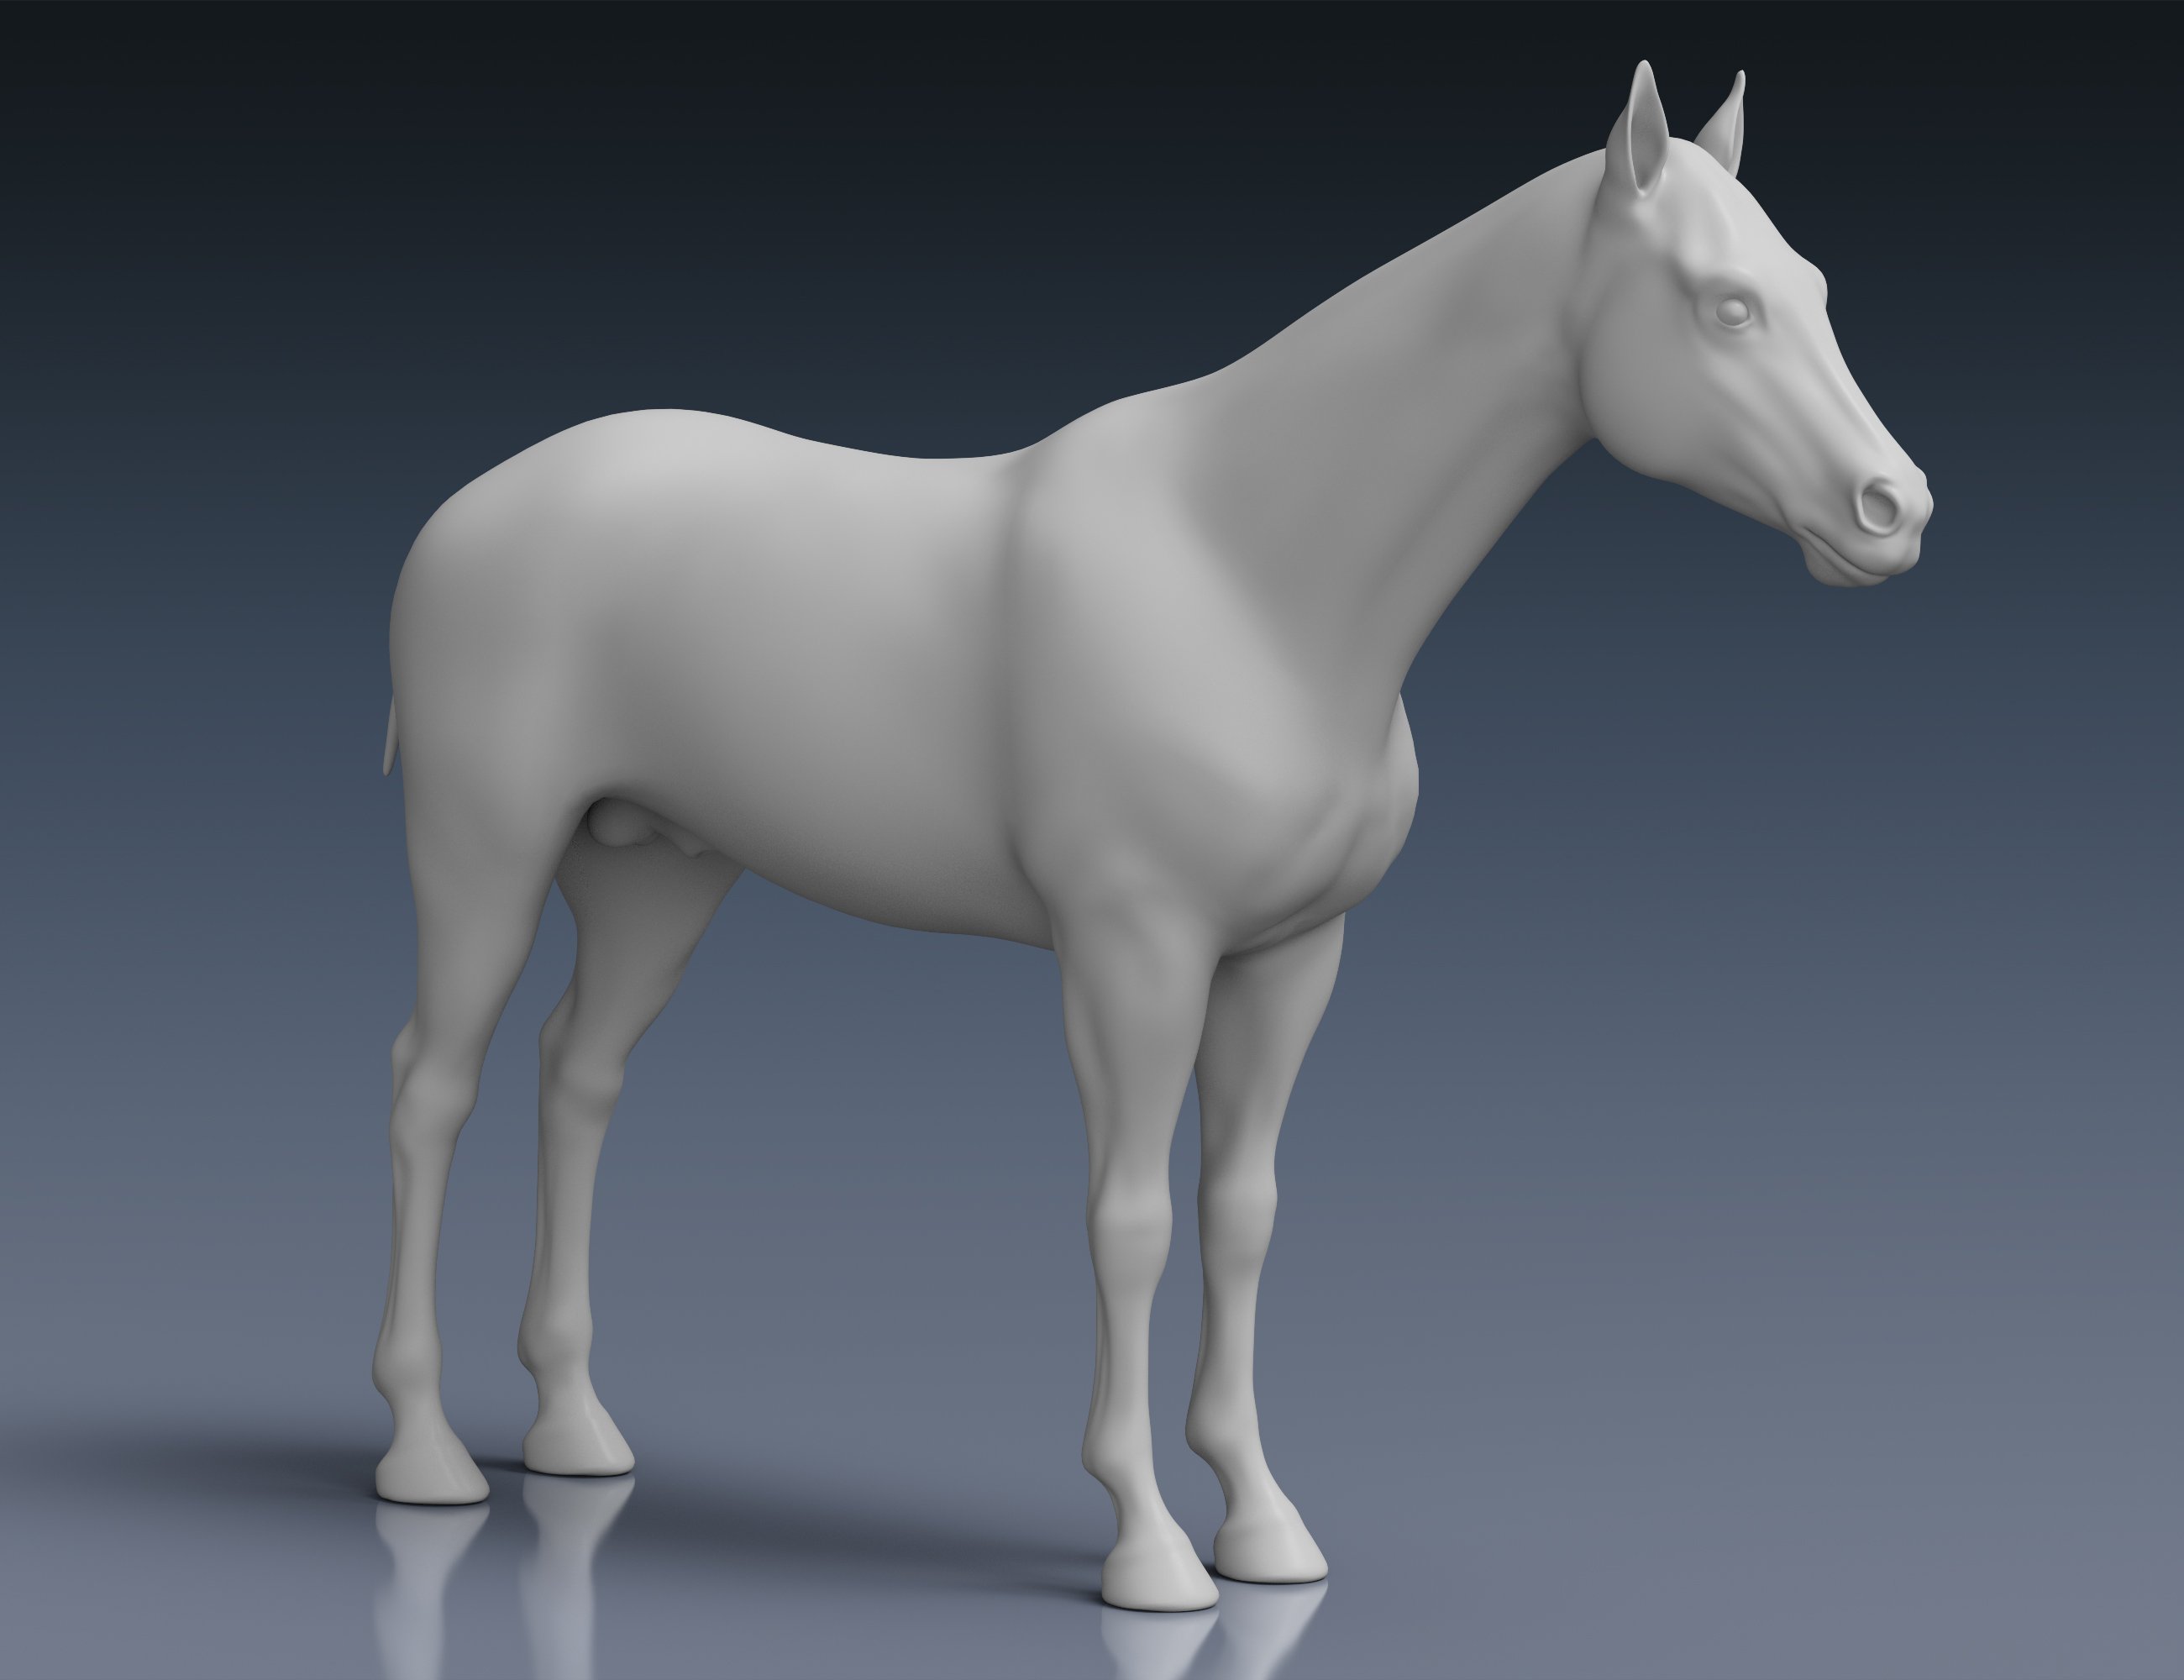 Daz Horse 3 by: Alessandro_AM, 3D Models by Daz 3D